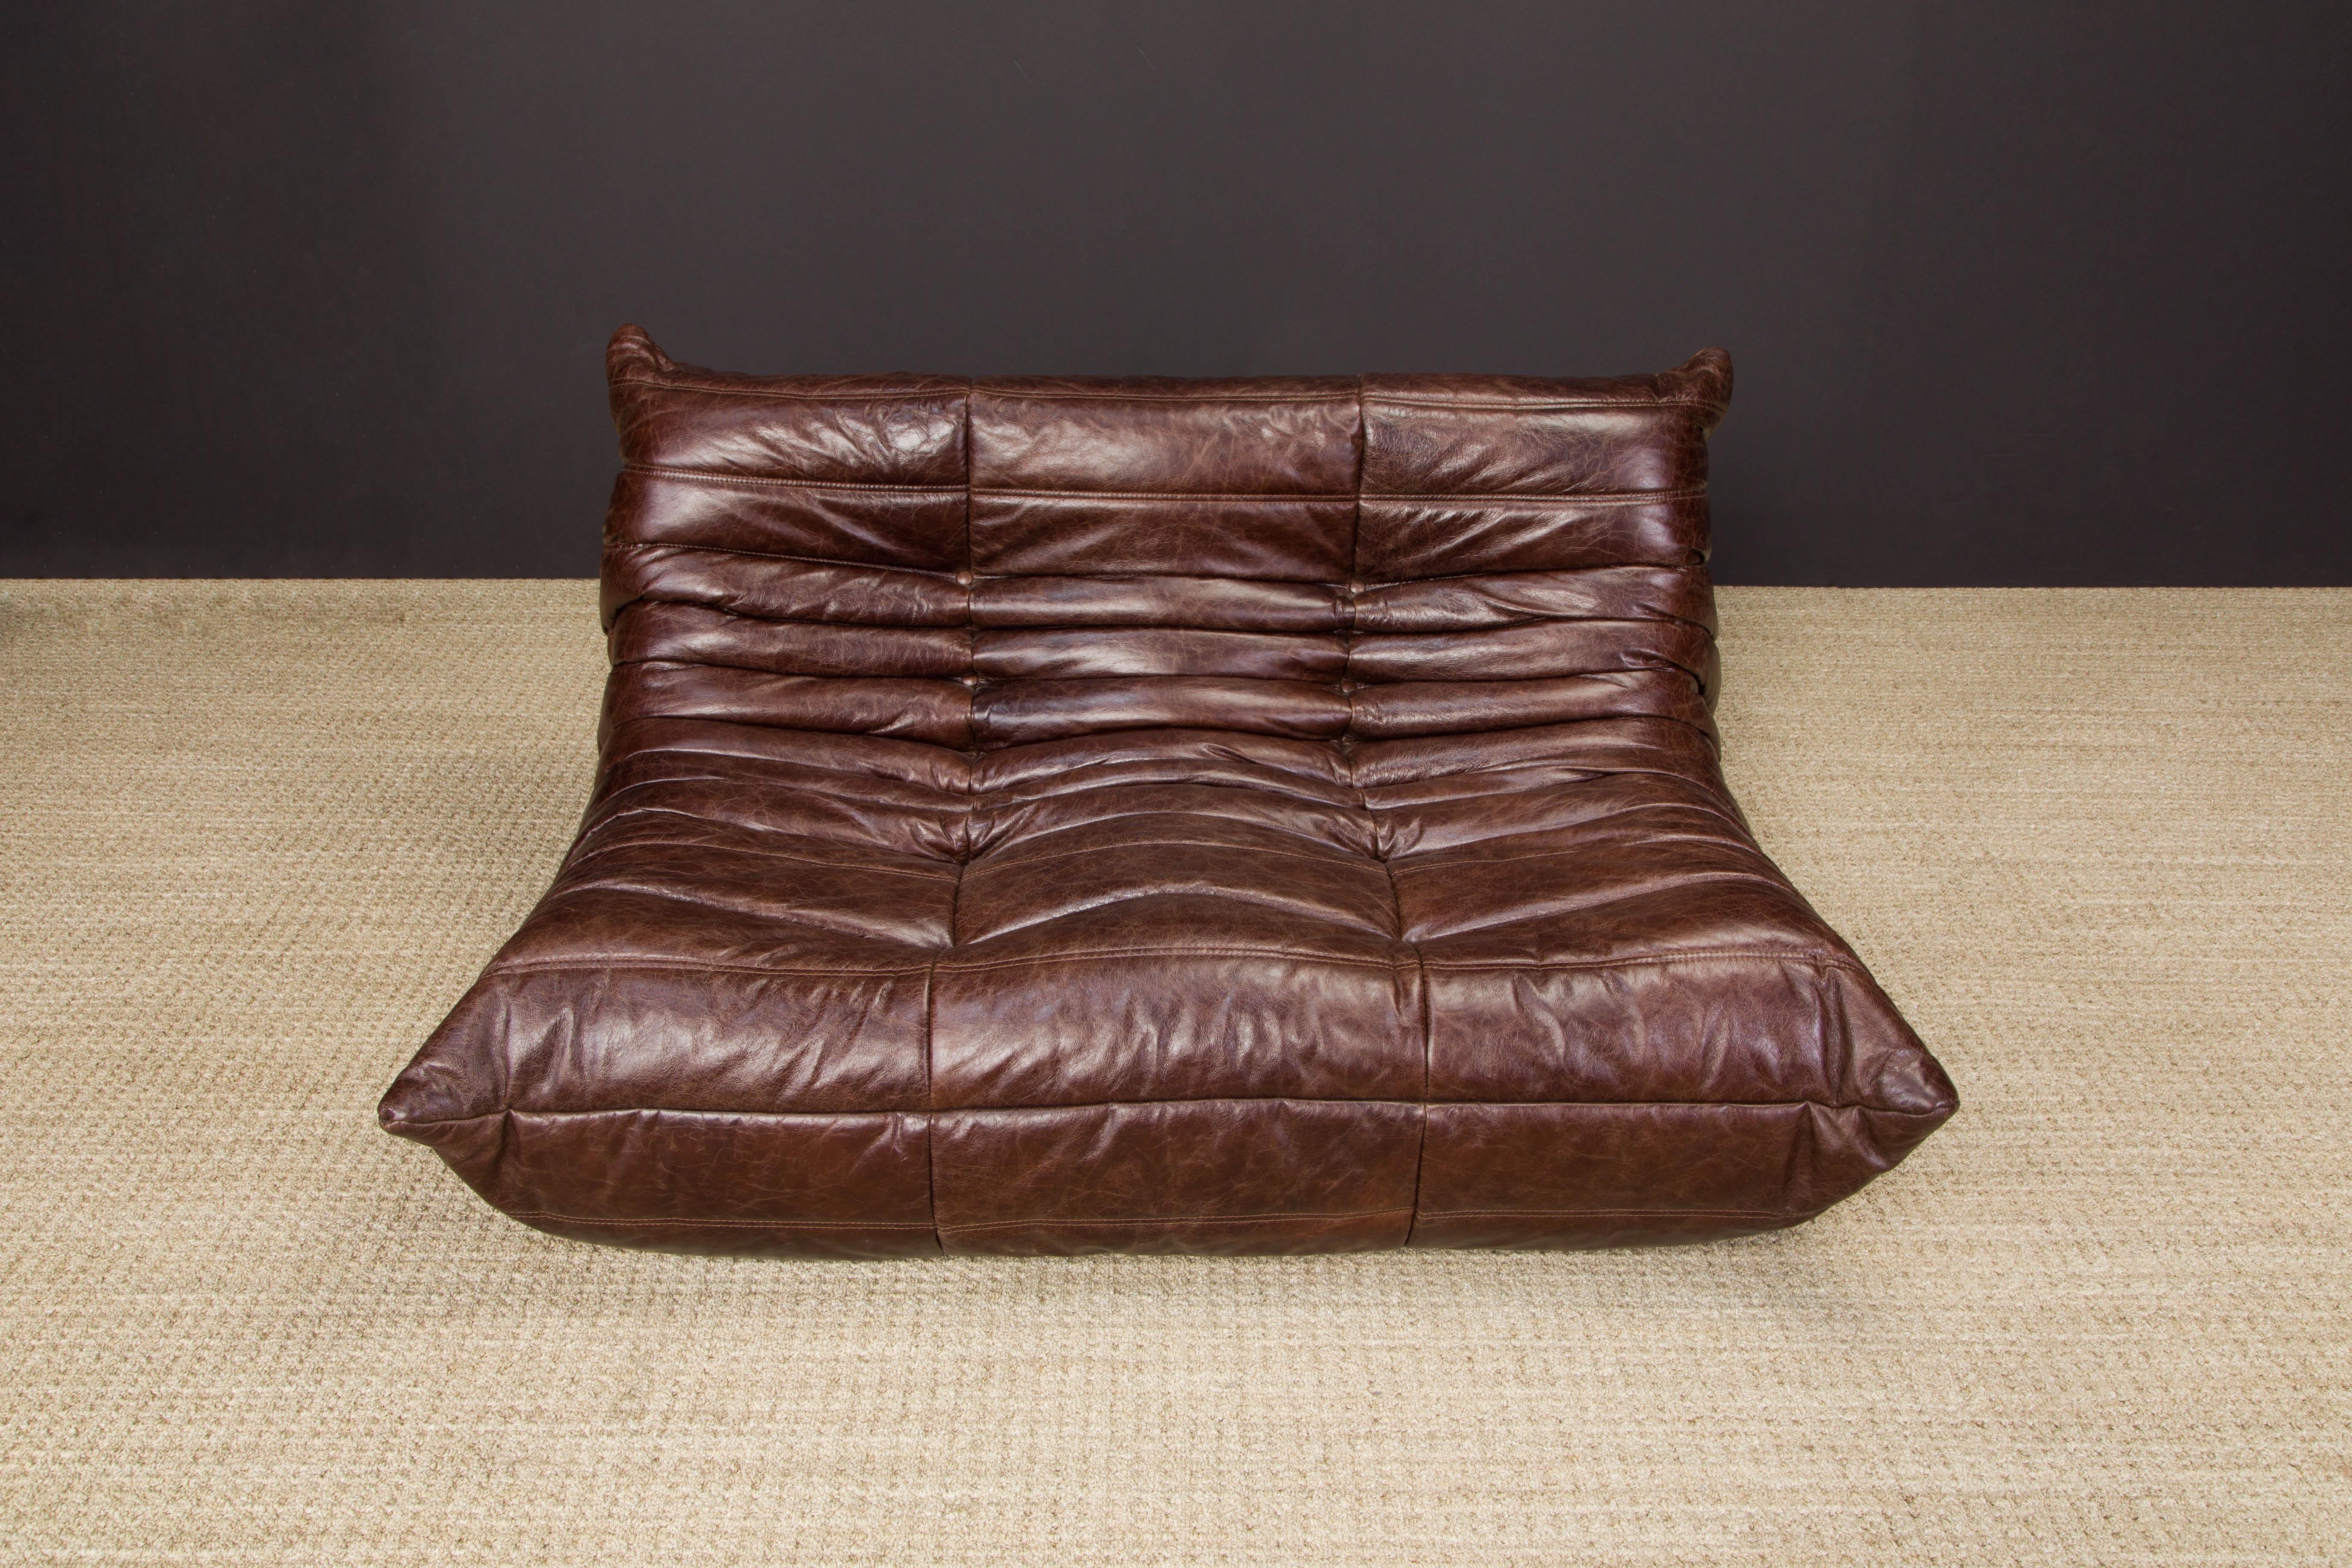 Brown Leather 'Togo' Loveseat Sofa by Michel Ducaroy for Ligne Roset, Signed 1